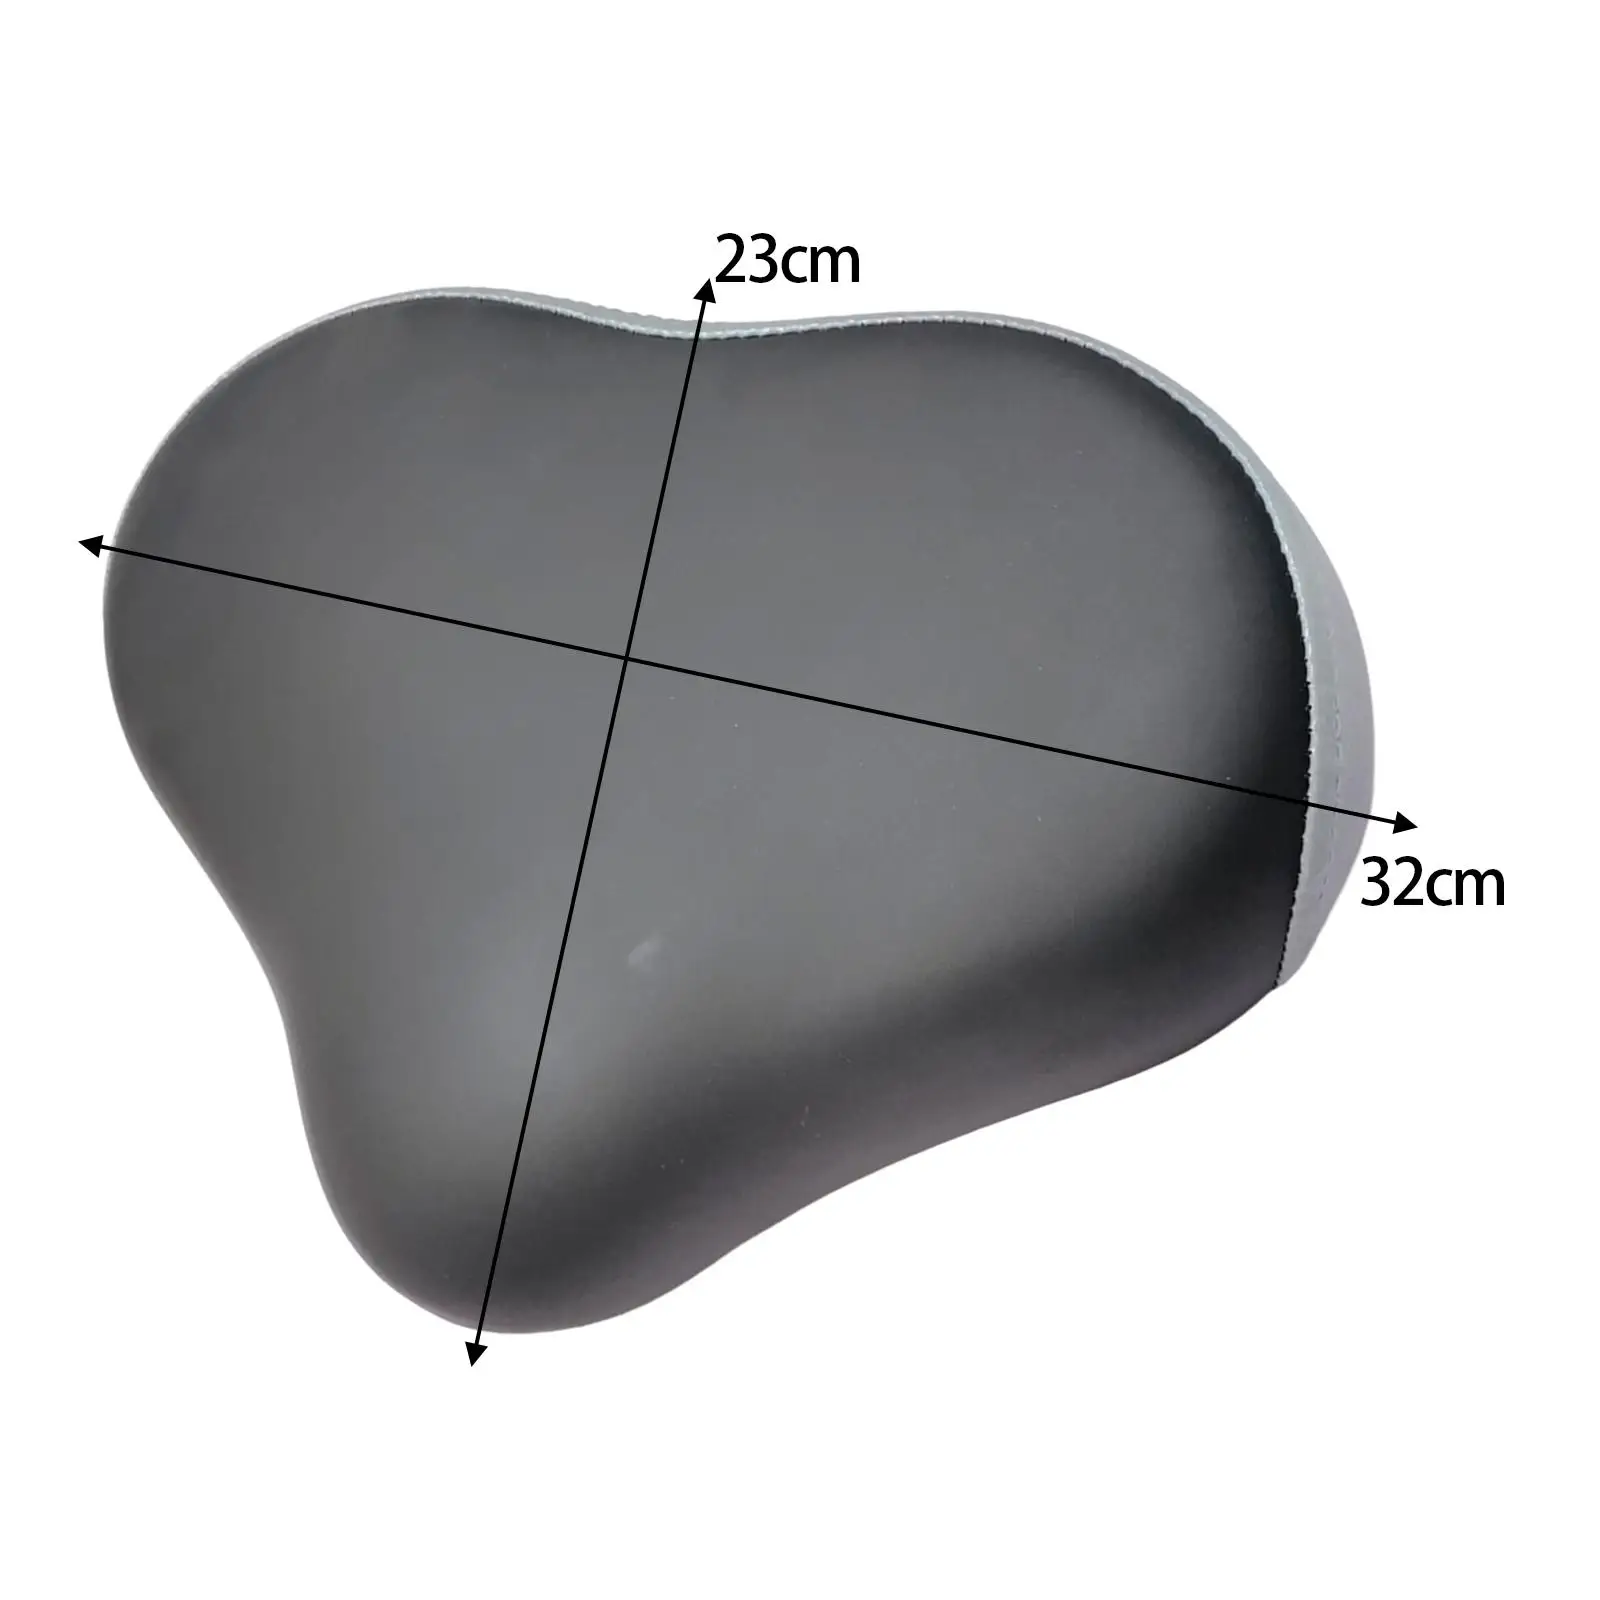 Bike Seat Wide Bicycle Saddle for Fitness Equipment Indoor/Outdoor Bikes